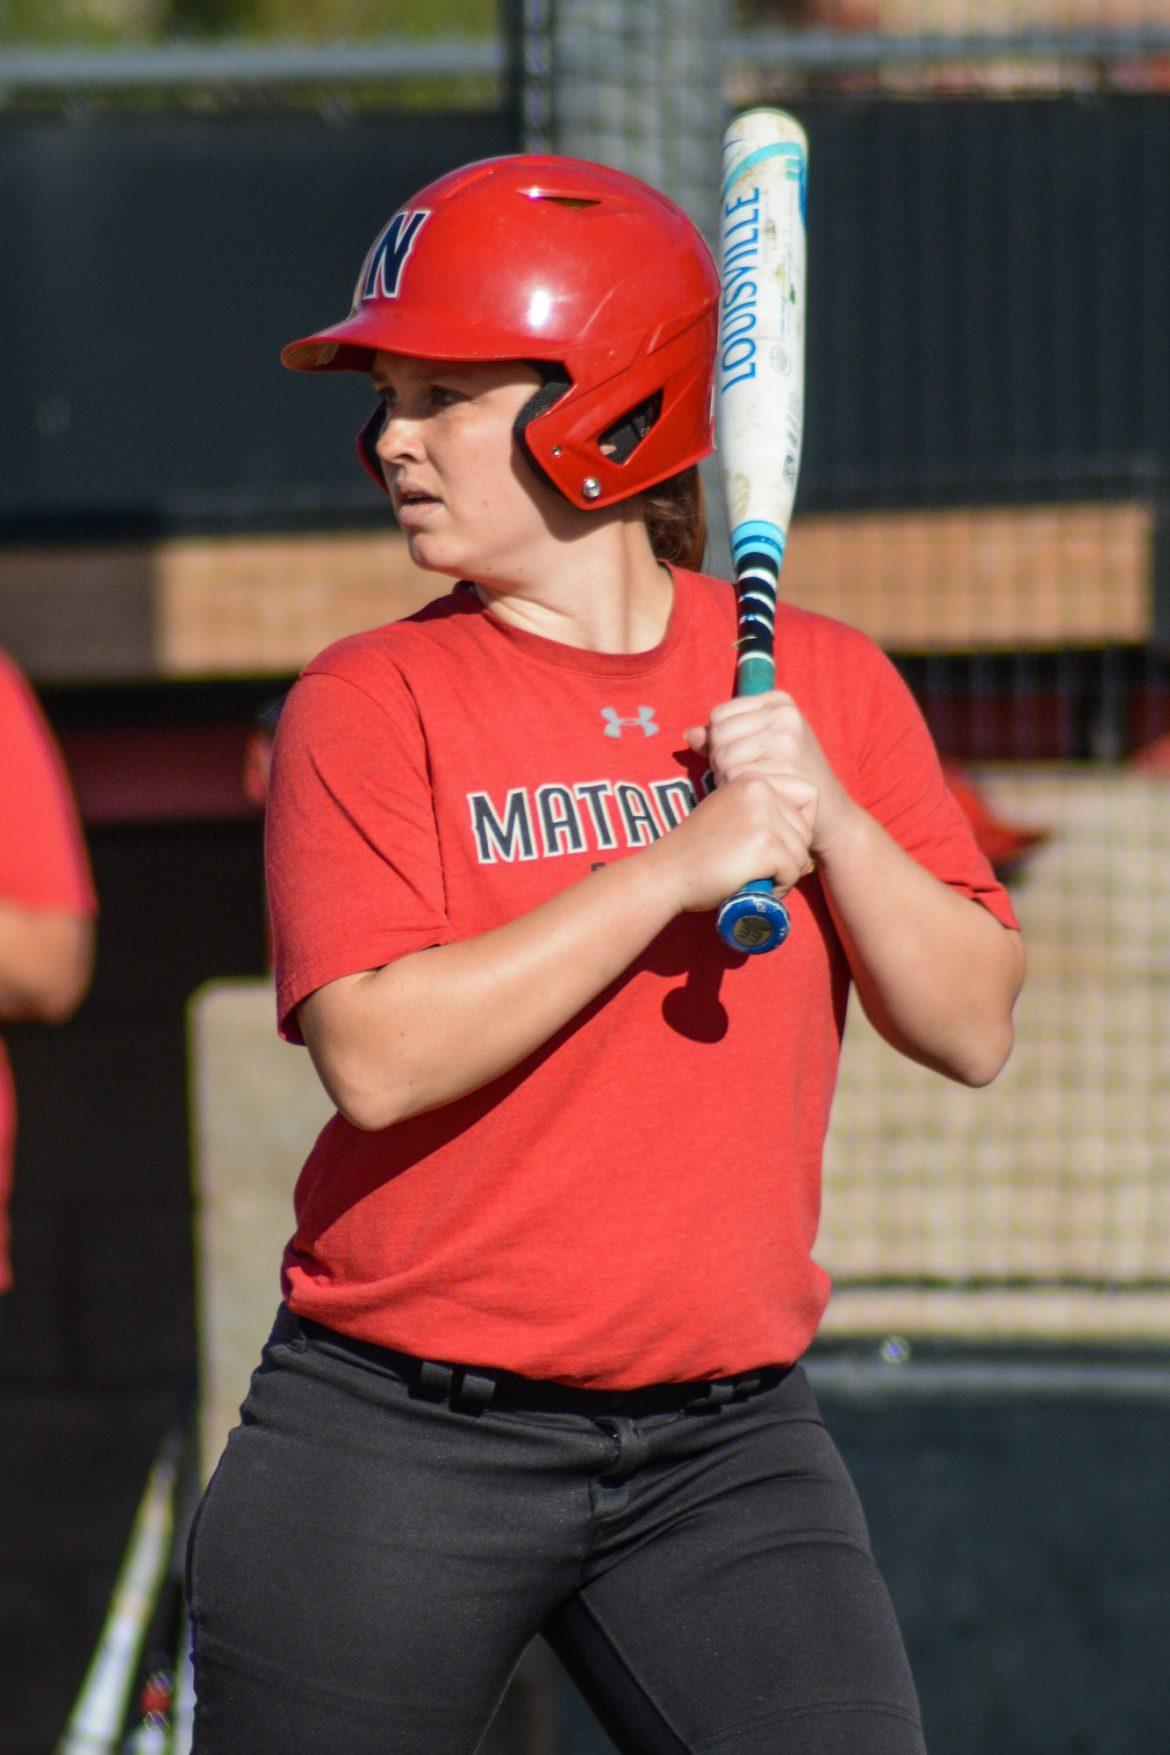 softball player at bat in red uniform